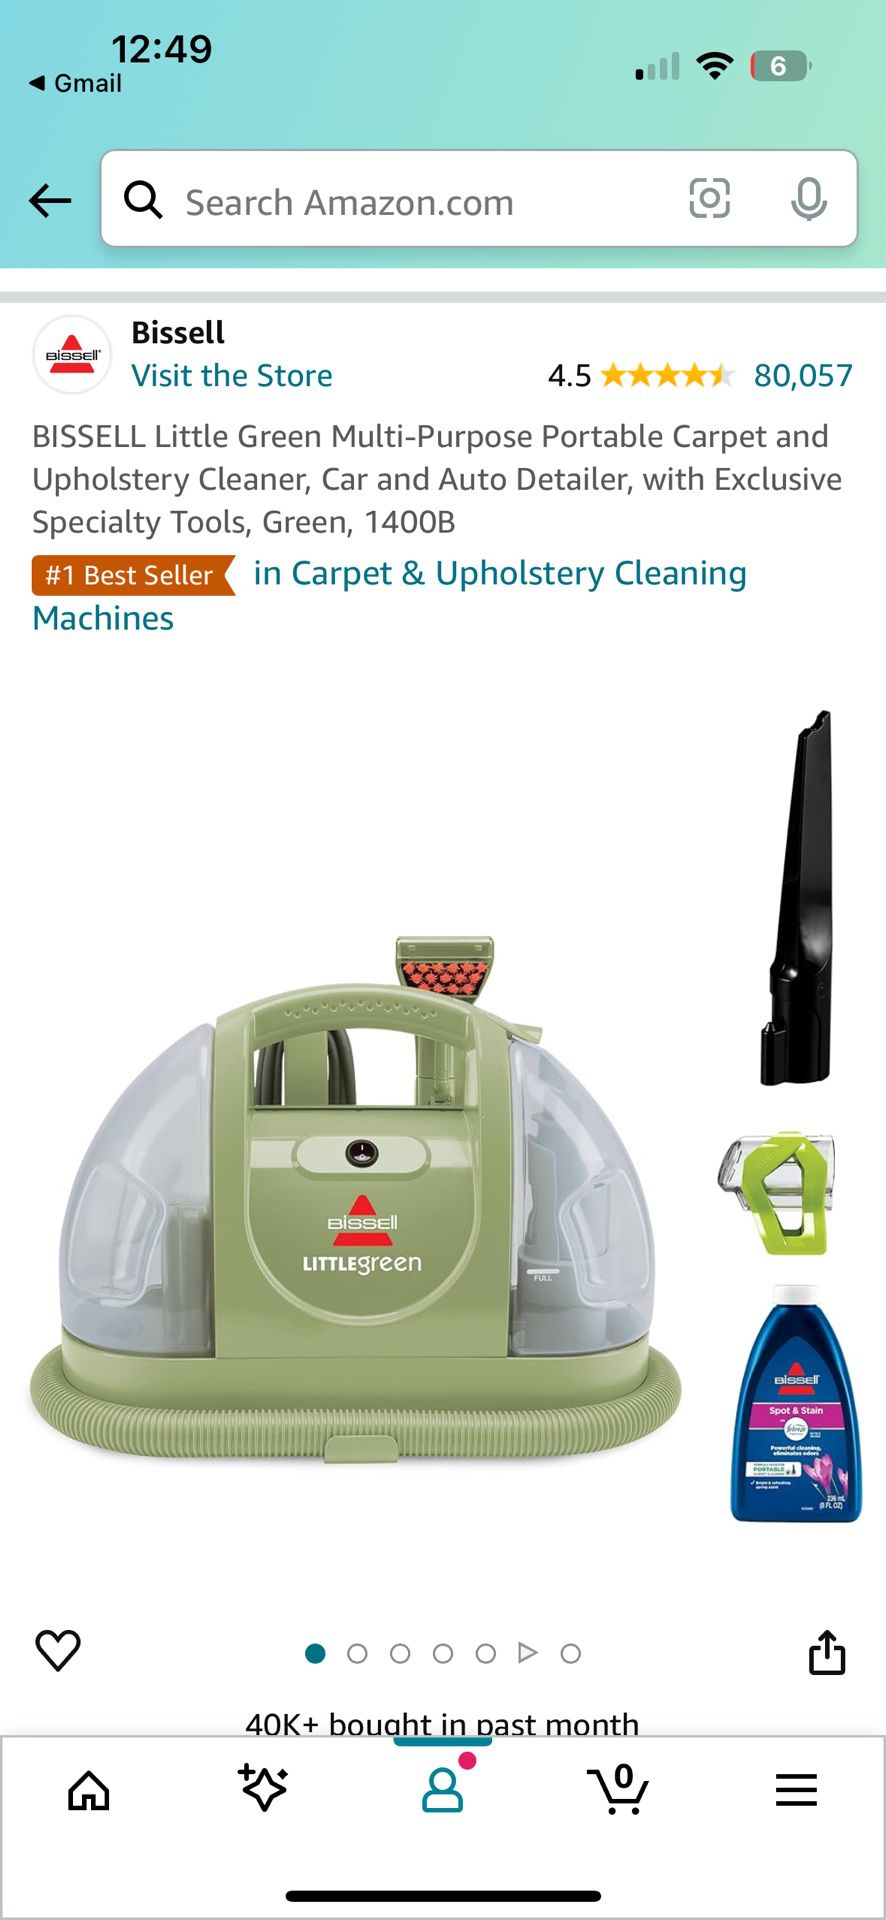 BISSELL Little Green Multi-Purpose Portable Carpet and Upholstery Cleaner/Steamer